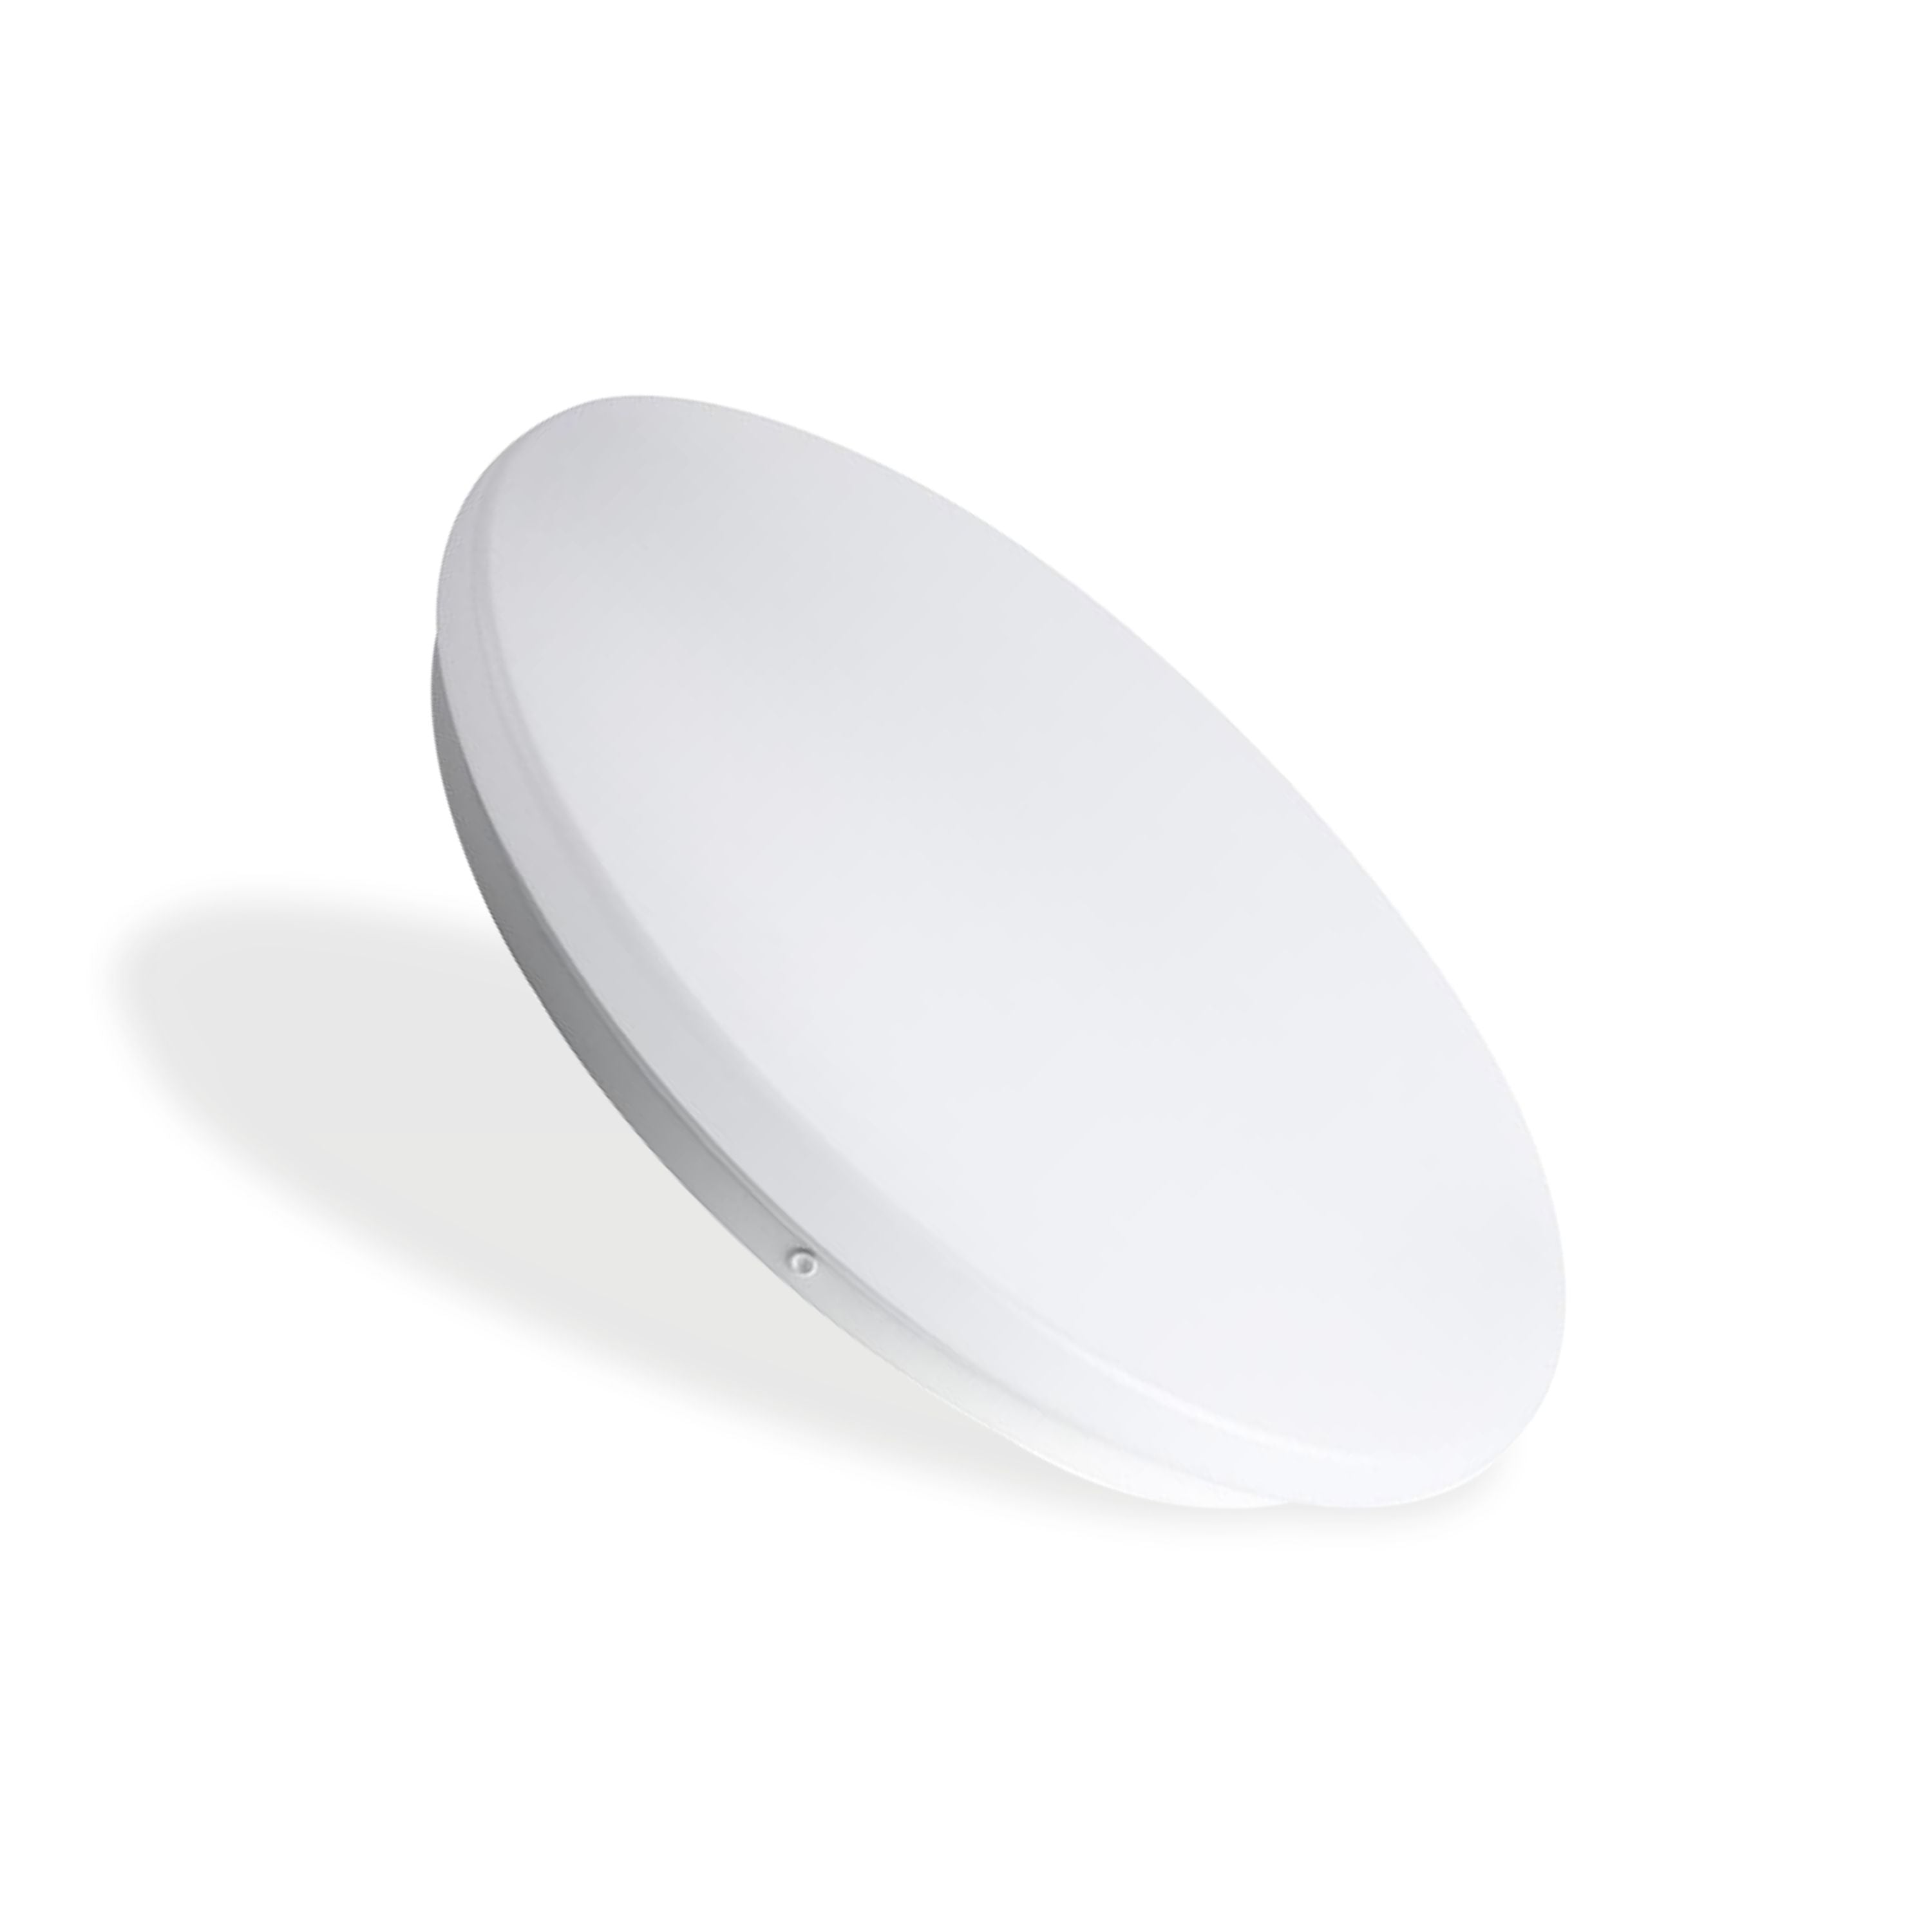 12W Ceiling Light With Microwave Sensor 960 Lumens CCT Changeable Warm White to Cool White, 250*55mm IP44 With Quick Connector